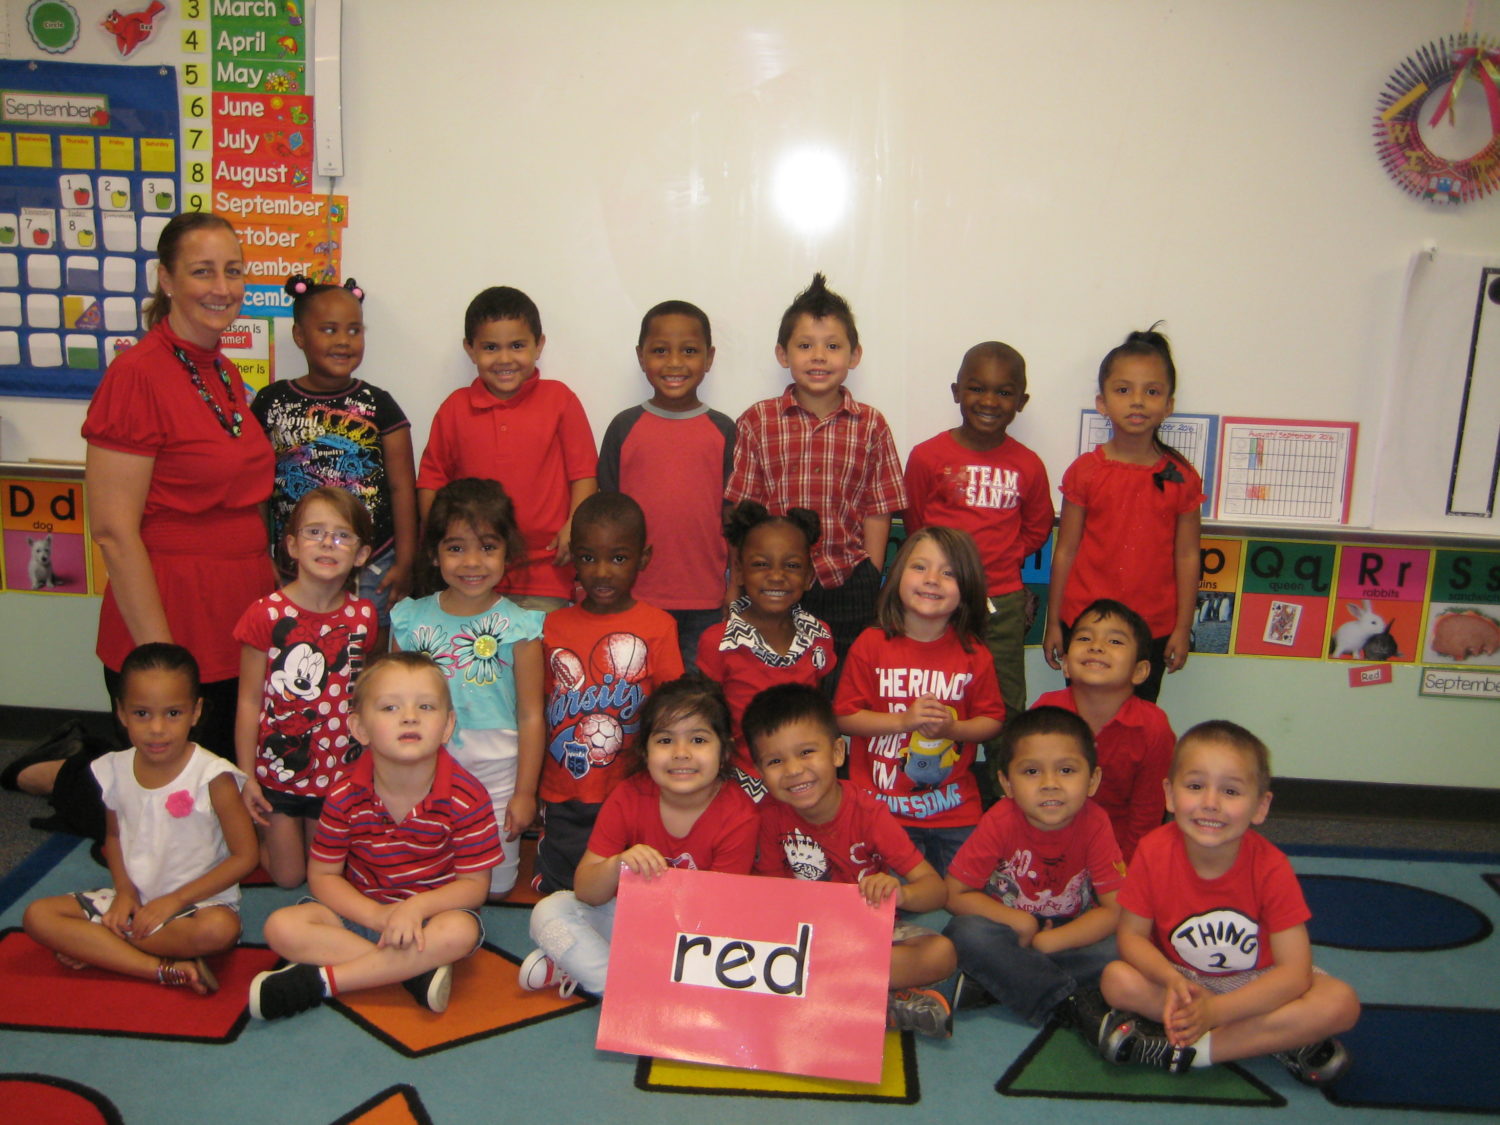 Mrs. Witt’s pre-k class at Houston Elementary learns about the color red.